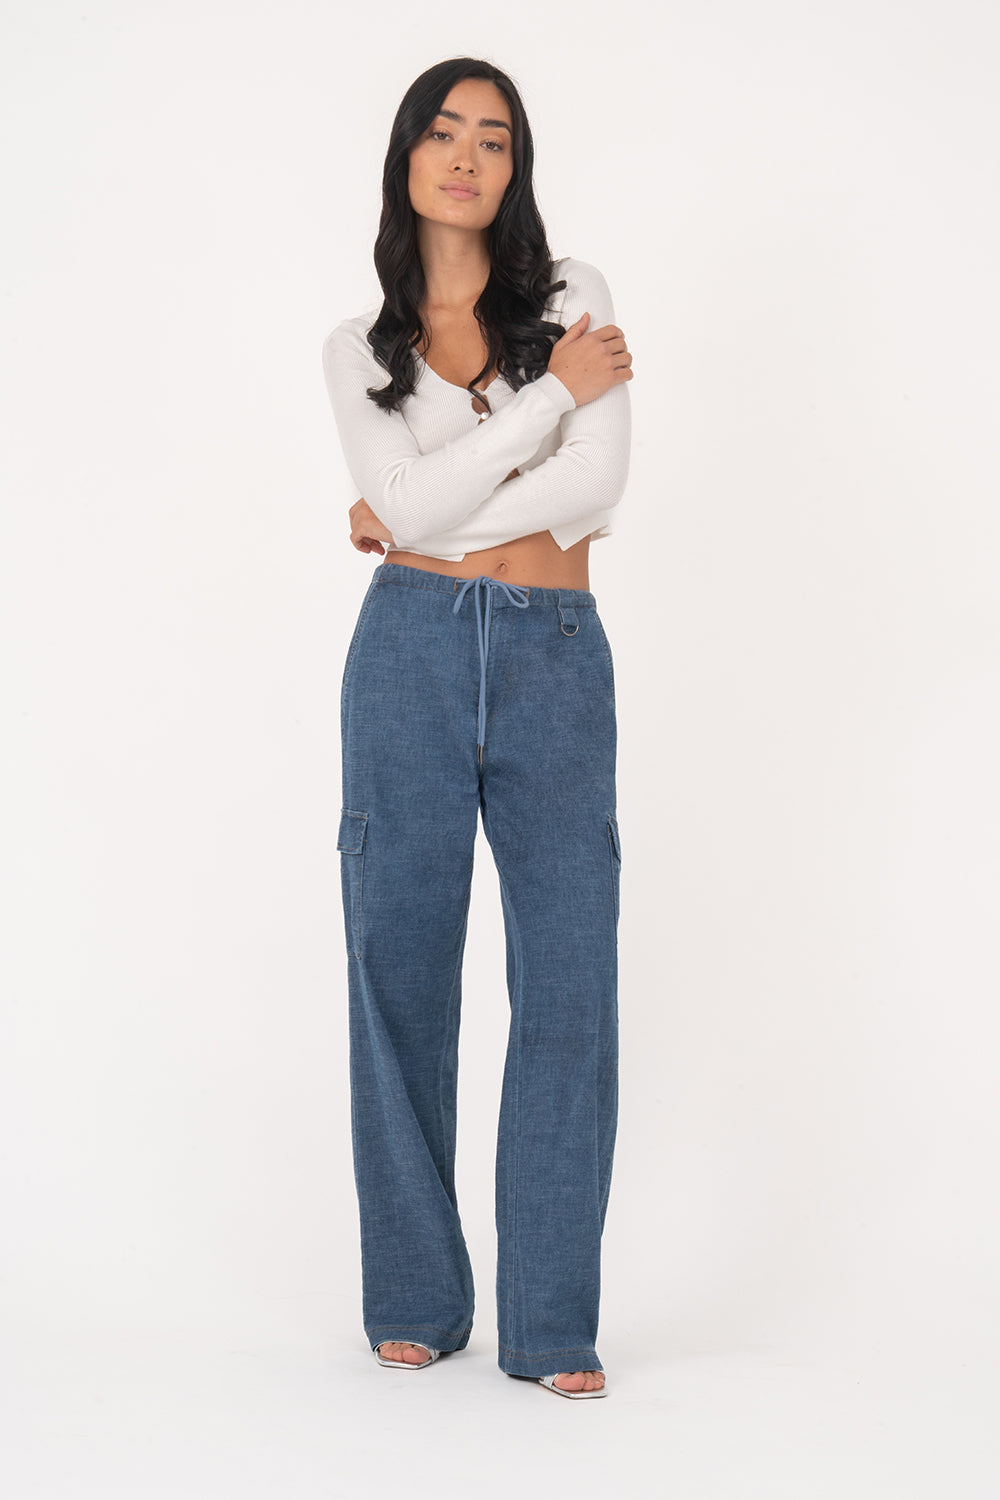 Denim by Nature™ Winifred Cargo Pant